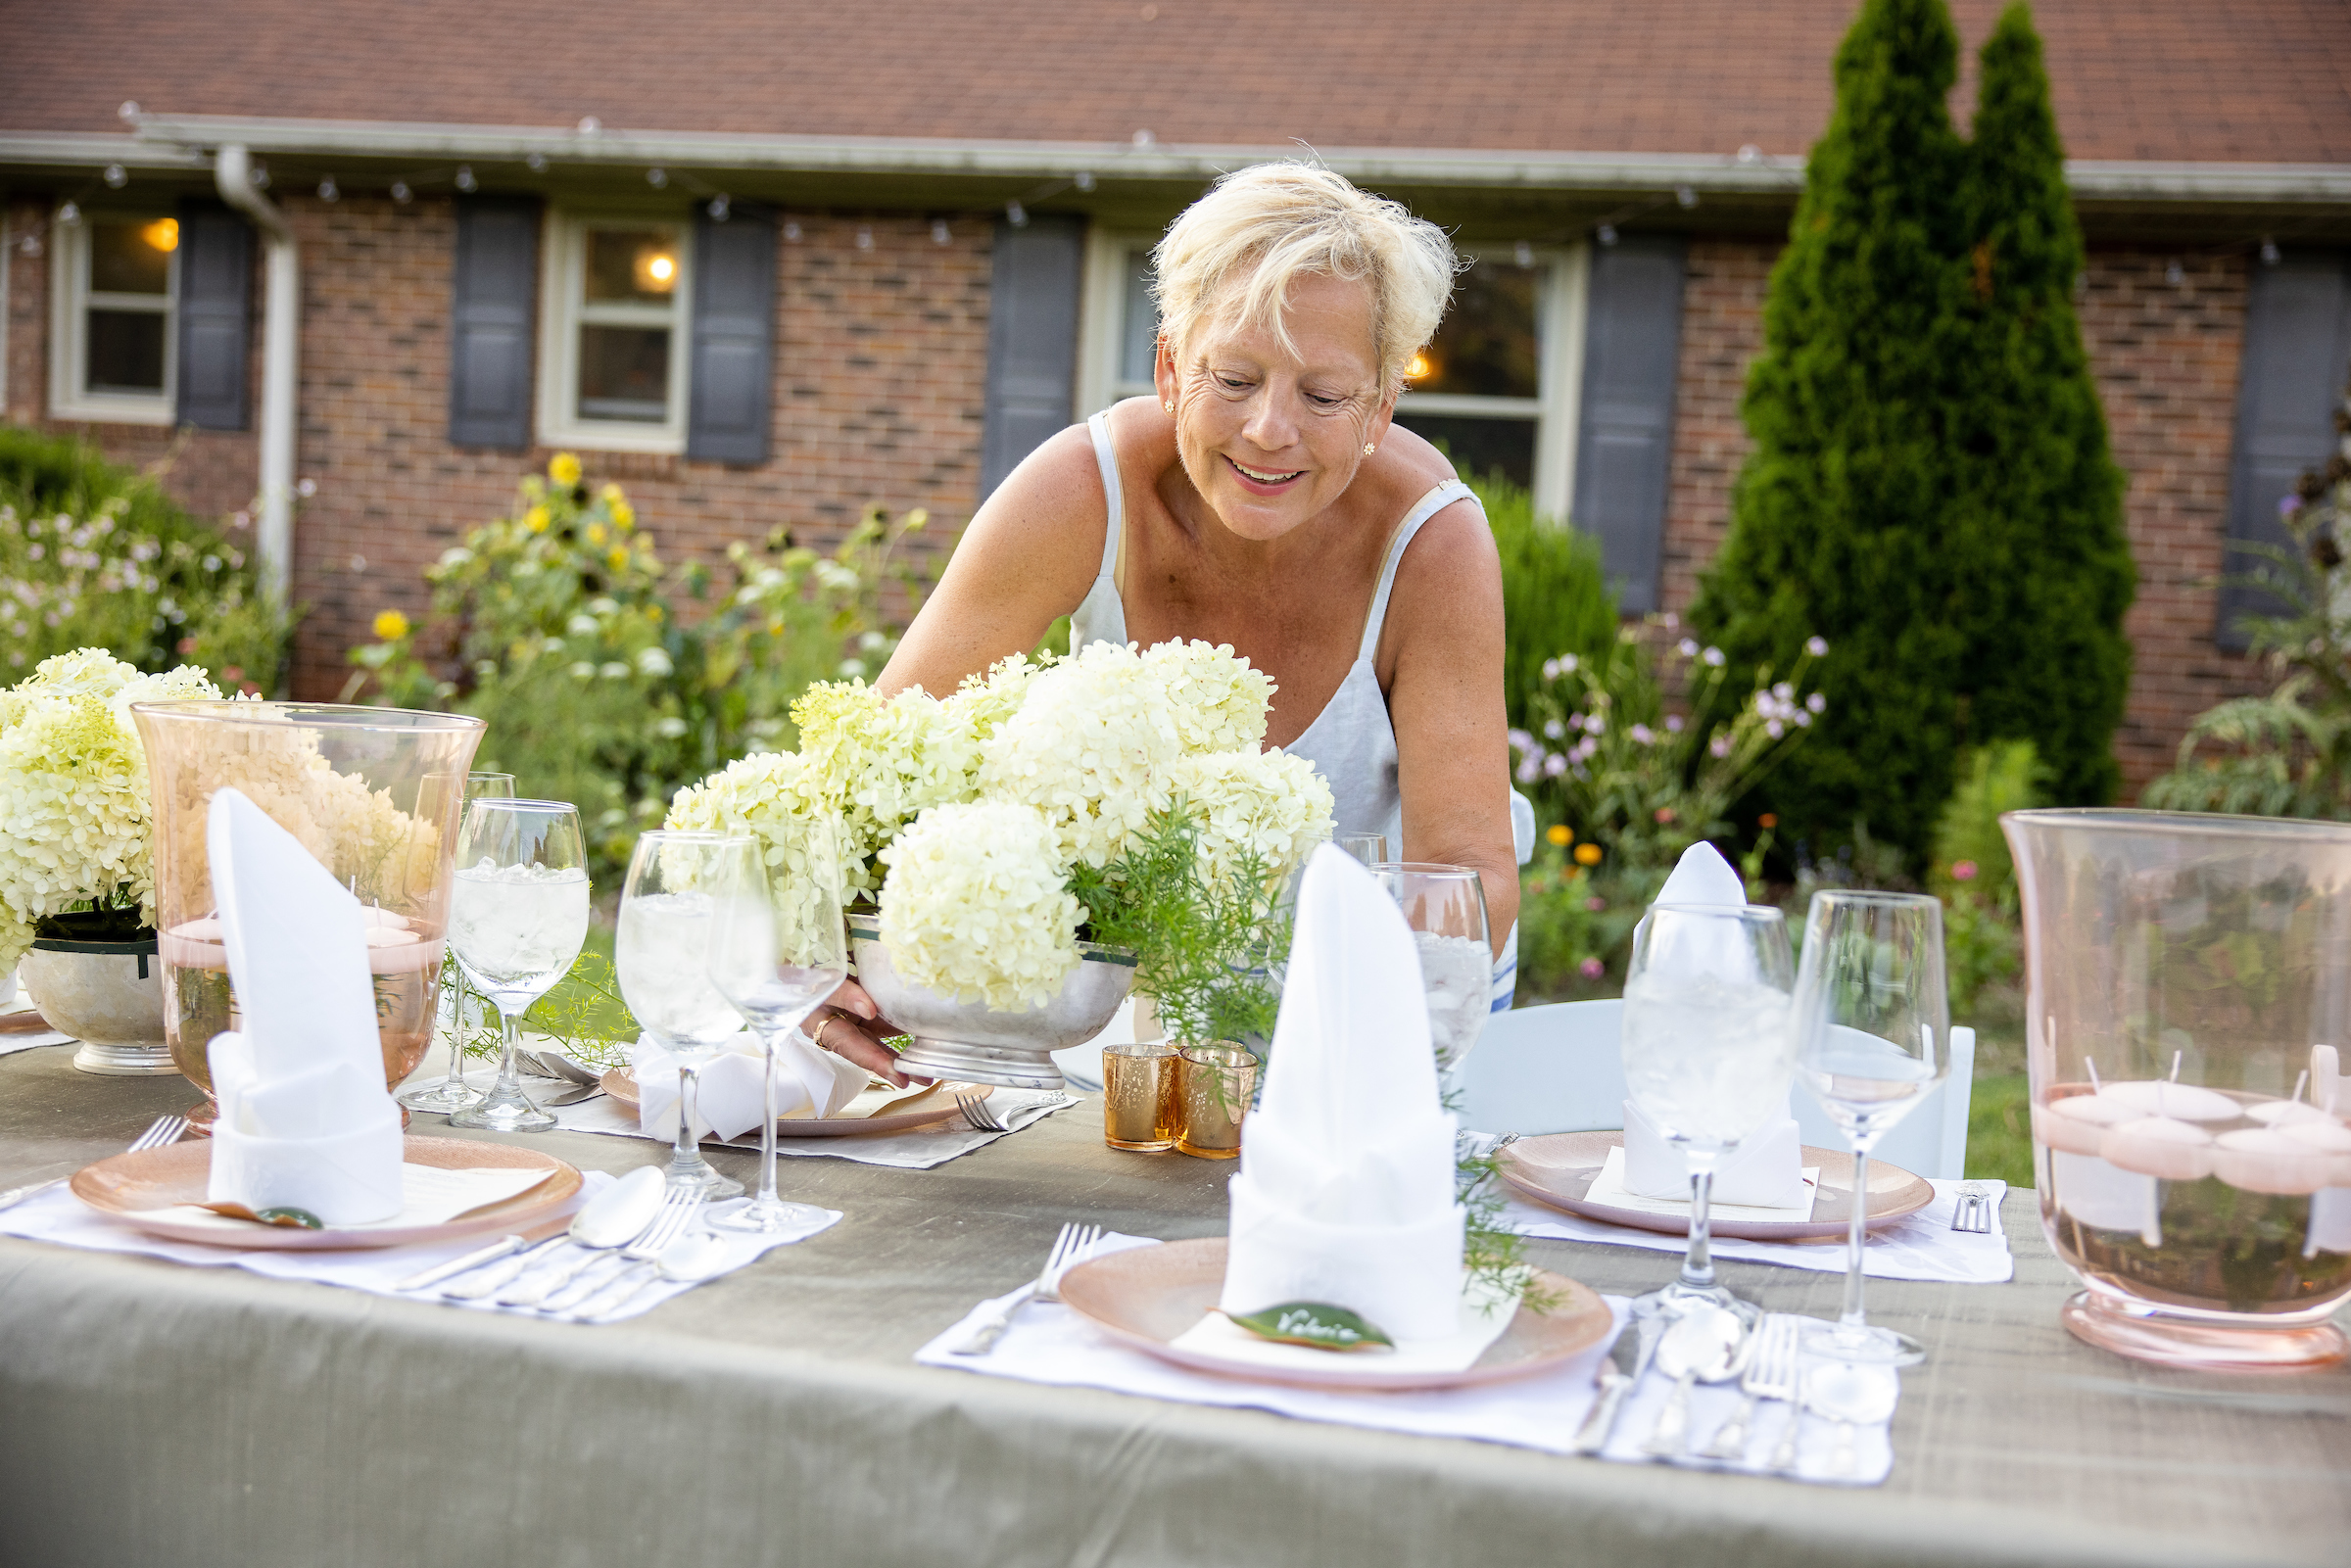 A woman arranging flowers on a table. 